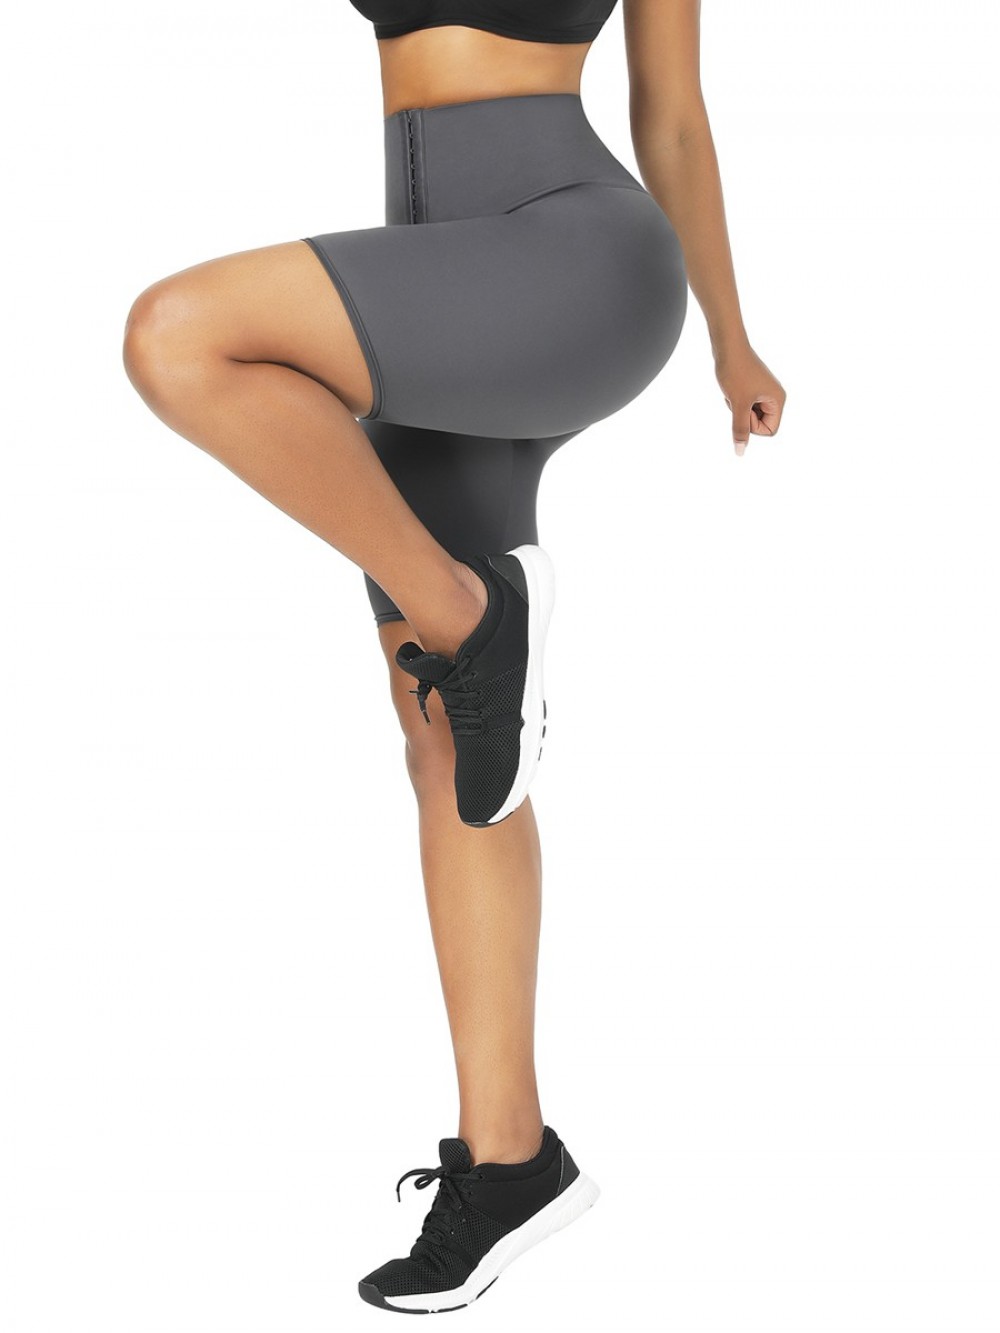 Gray 2-In-1 Tummy Control Waist Trainer Shorts Mid-Thigh Workout